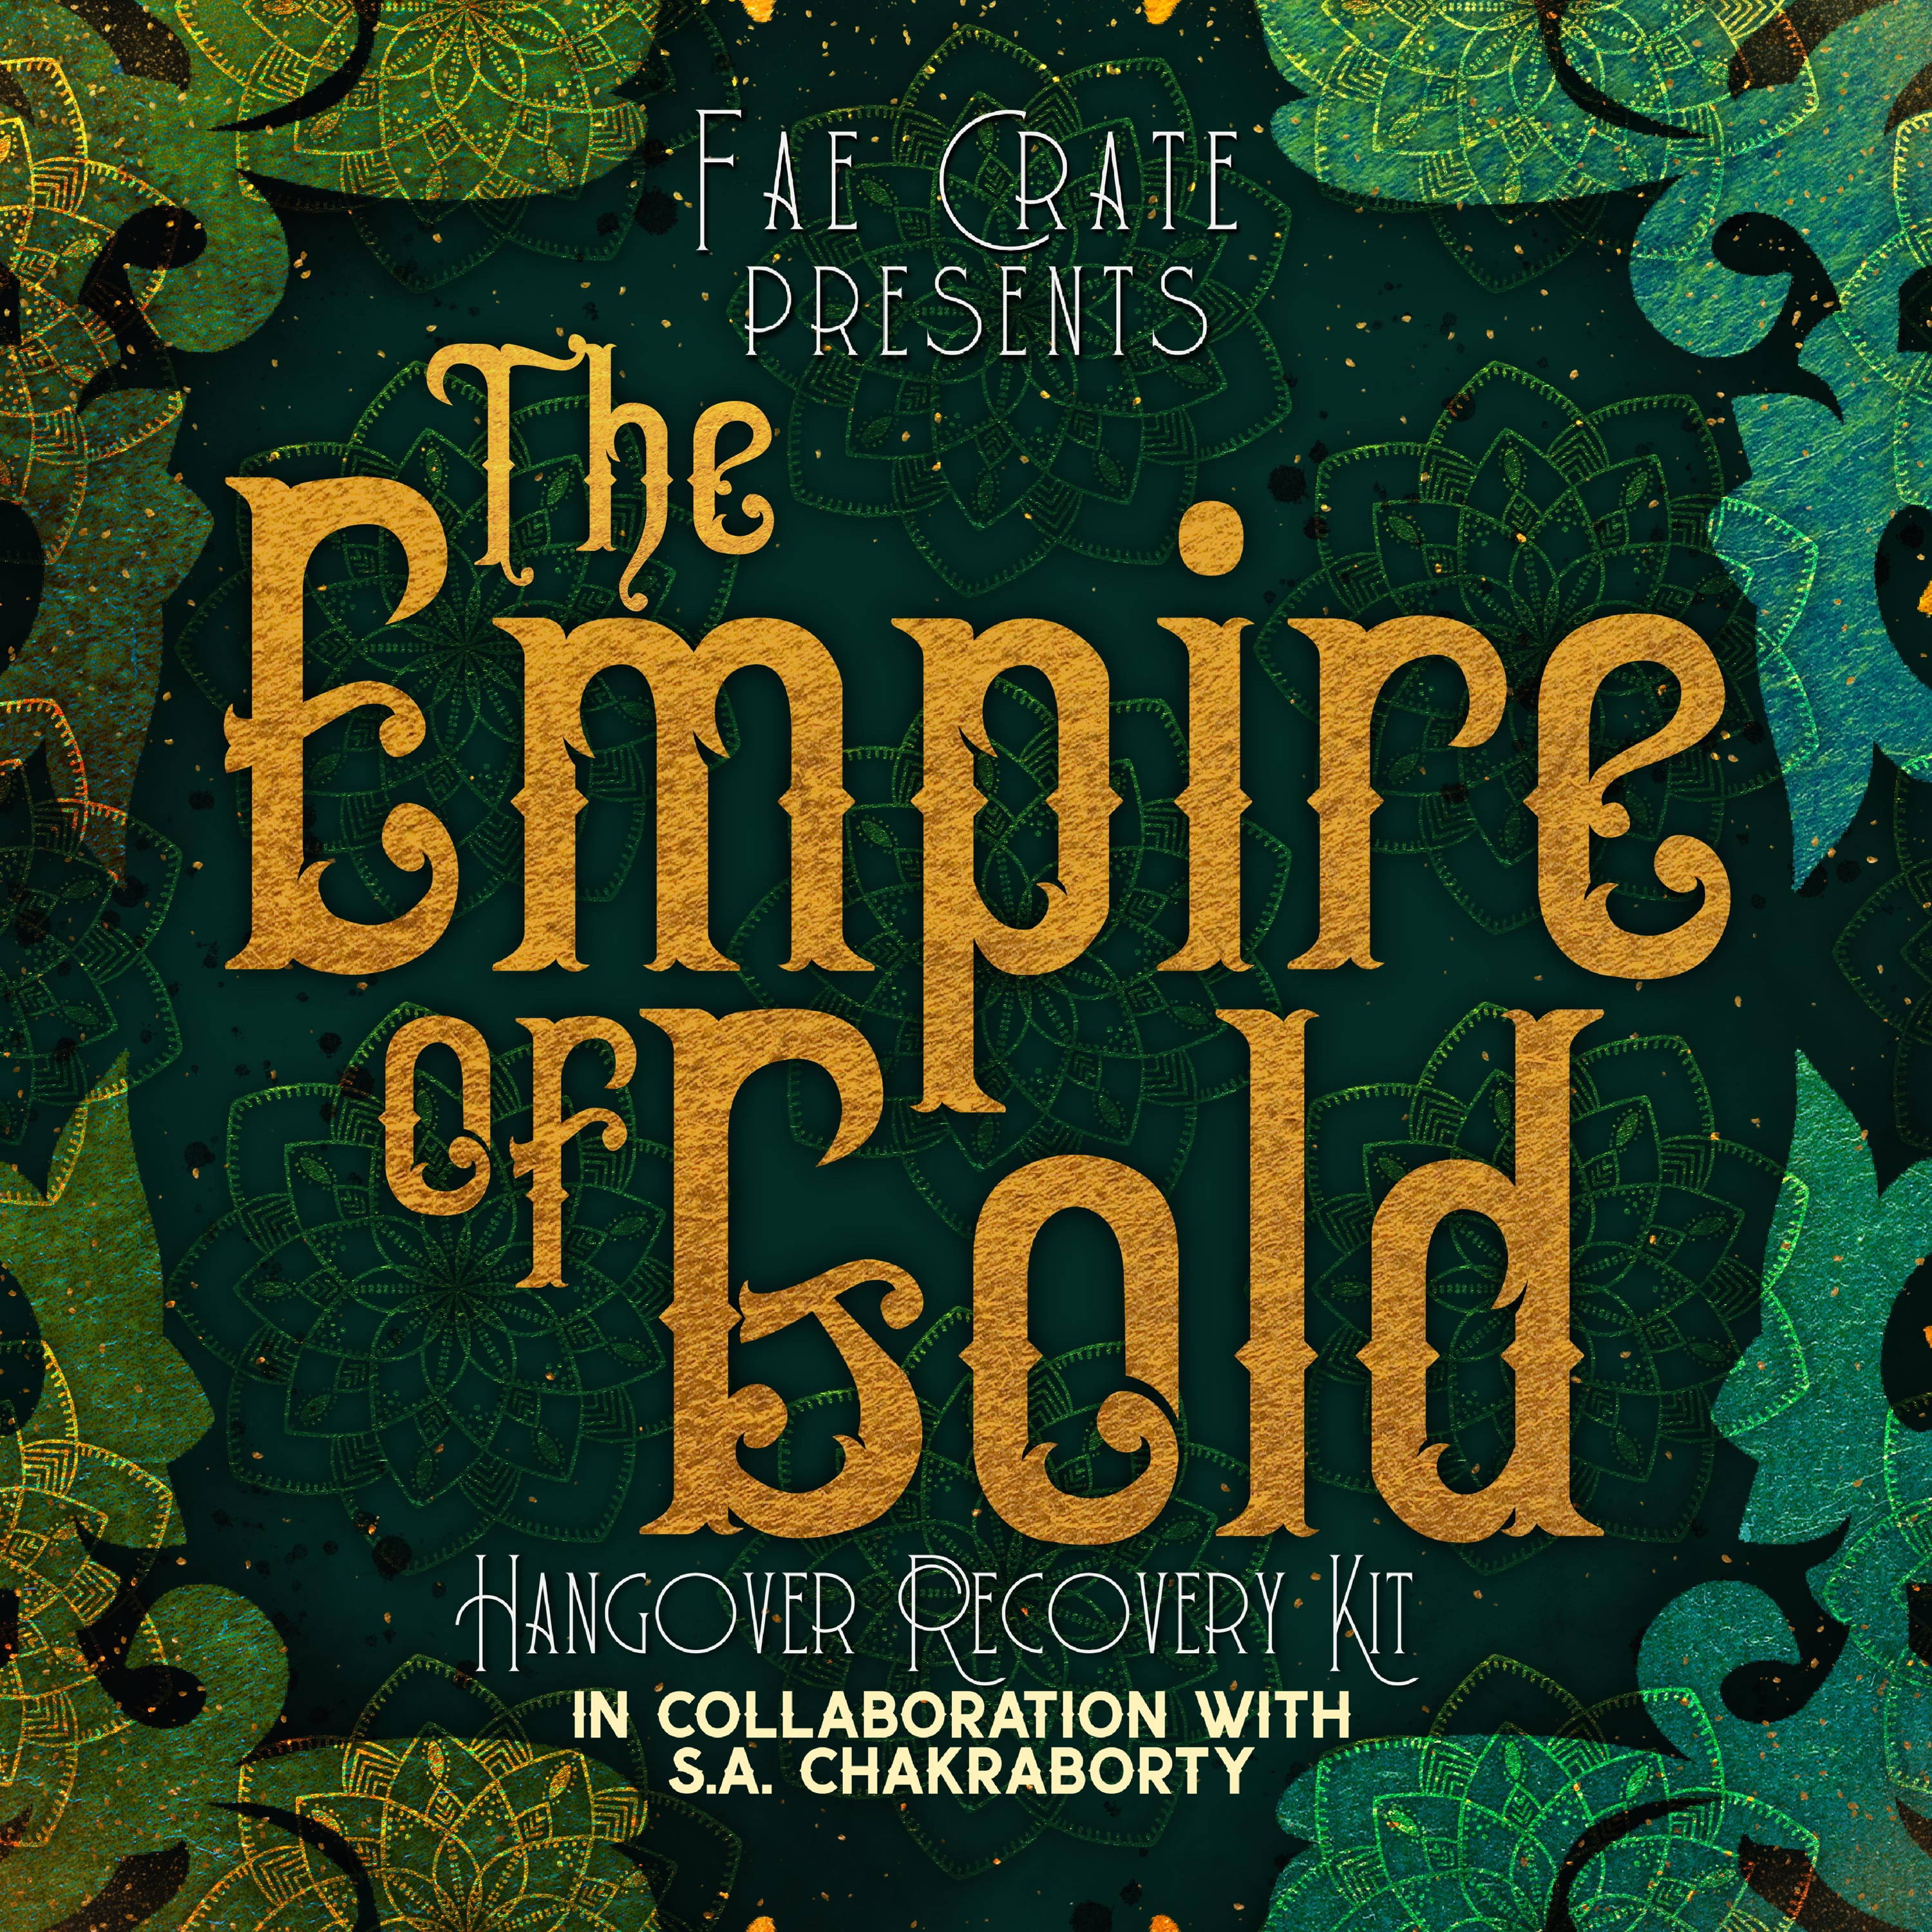 Fae Crate Presents The Empire of Gold Hangover Recovery Kit in Collaboration with S.A. Chakraborty